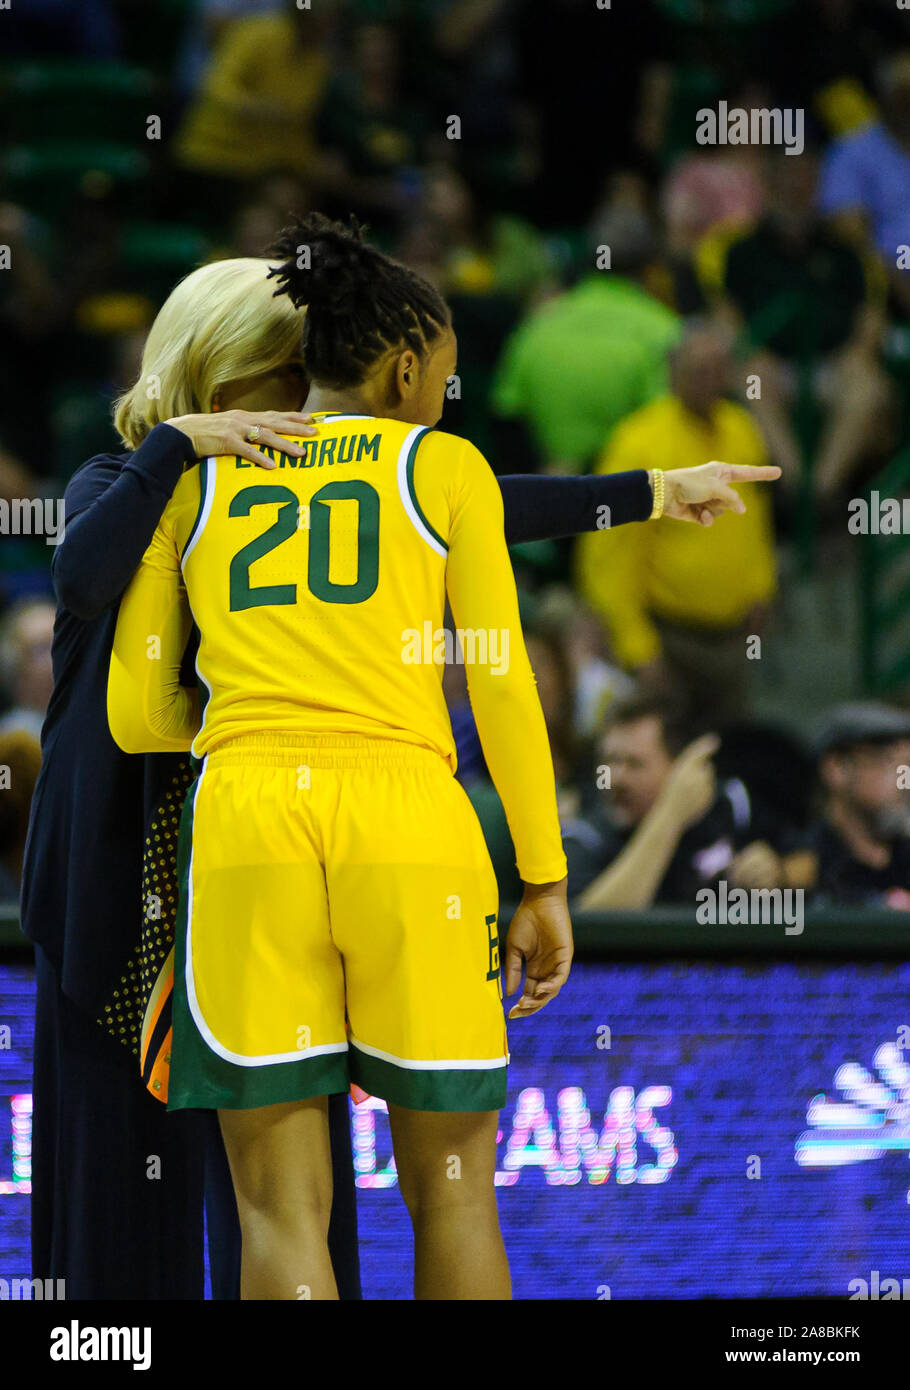 Waco, Texas, USA. 5th Nov, 2019. Baylor Lady Bears head coach Kim Mulkey talks with Baylor Lady Bears guard Juicy Landrum (20) during the 1st half of the NCAA Women's Basketball game between New Hampshire Wildcats and the Baylor Bears at The Ferrell Center in Waco, Texas. Matthew Lynch/CSM/Alamy Live News Stock Photo